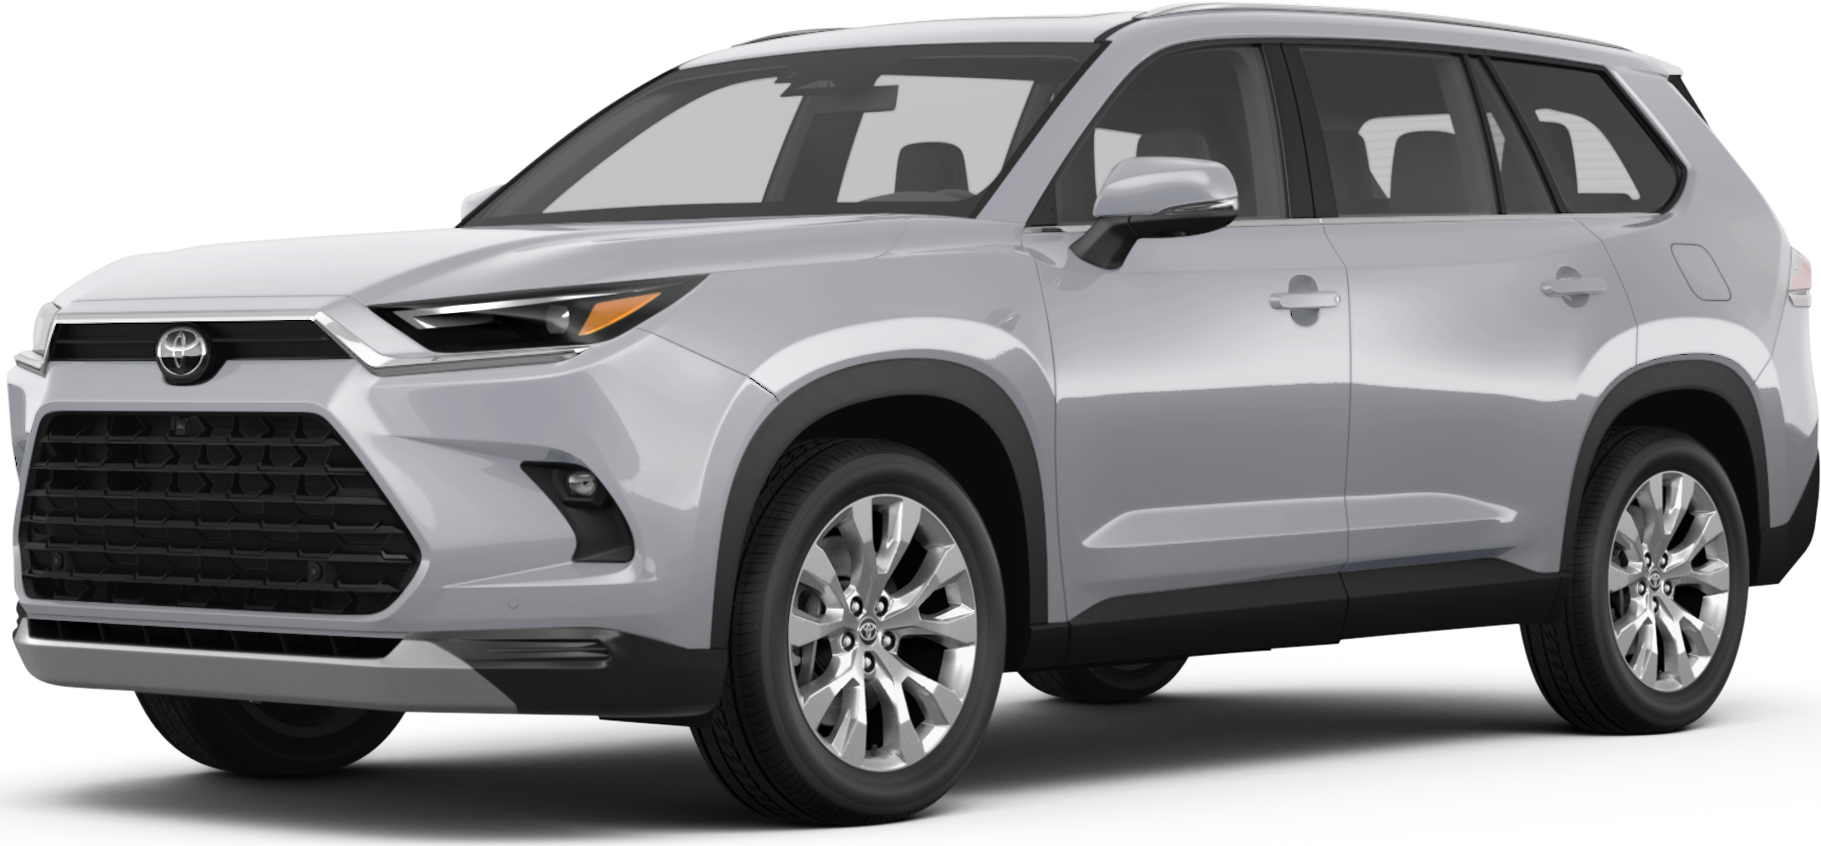 2022 Toyota Highlander Hybrid Prices, Reviews, and Pictures